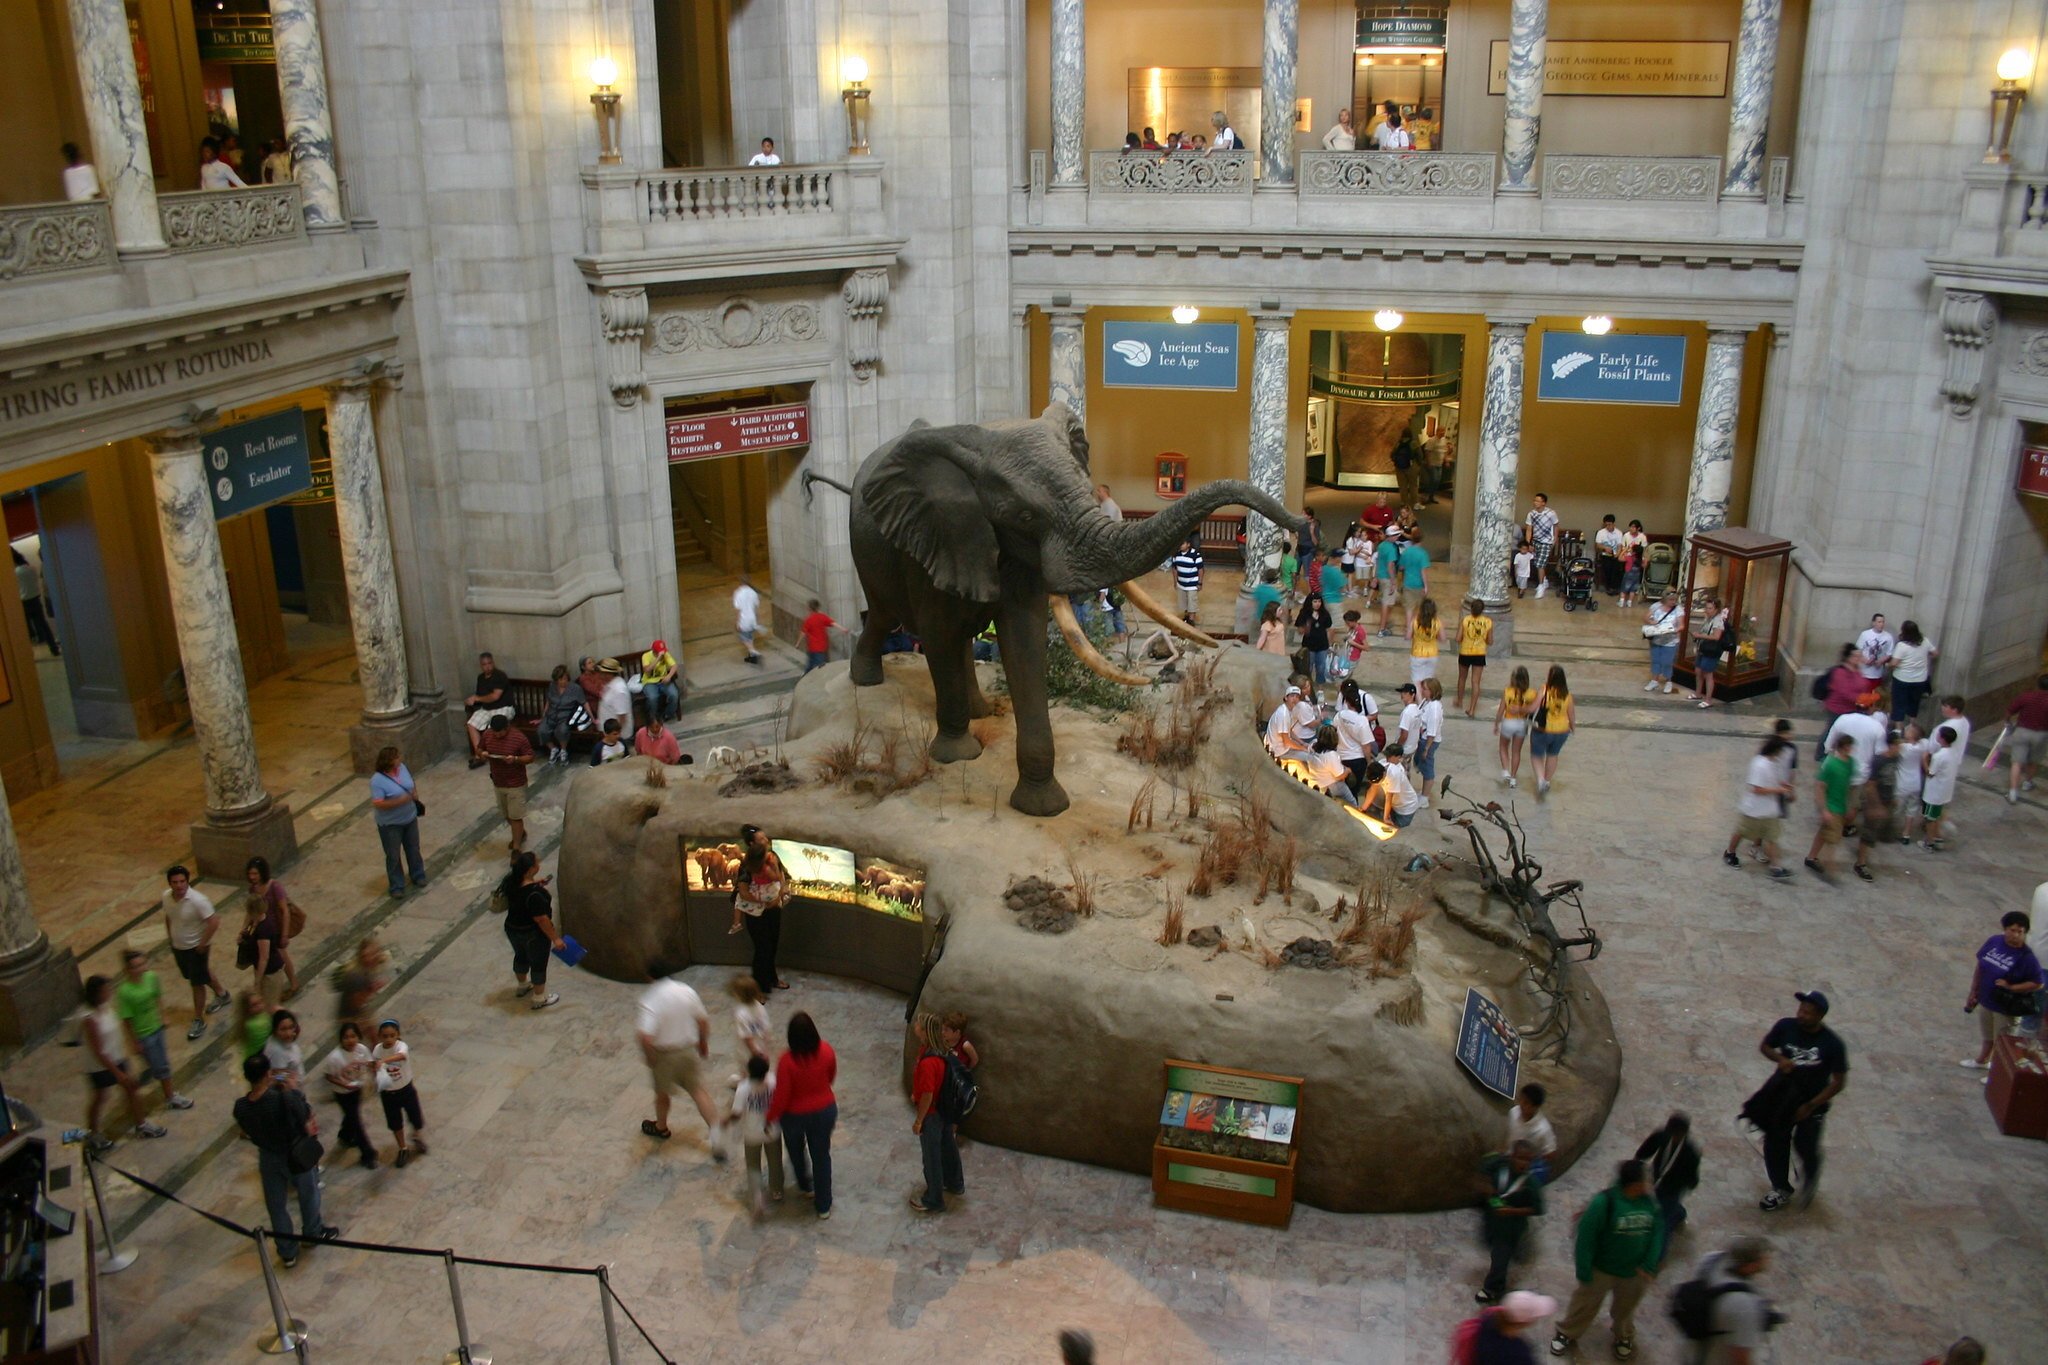 Kids can spend the night in the National Museum of Natural History. Photograph by Flickr user YoTut.